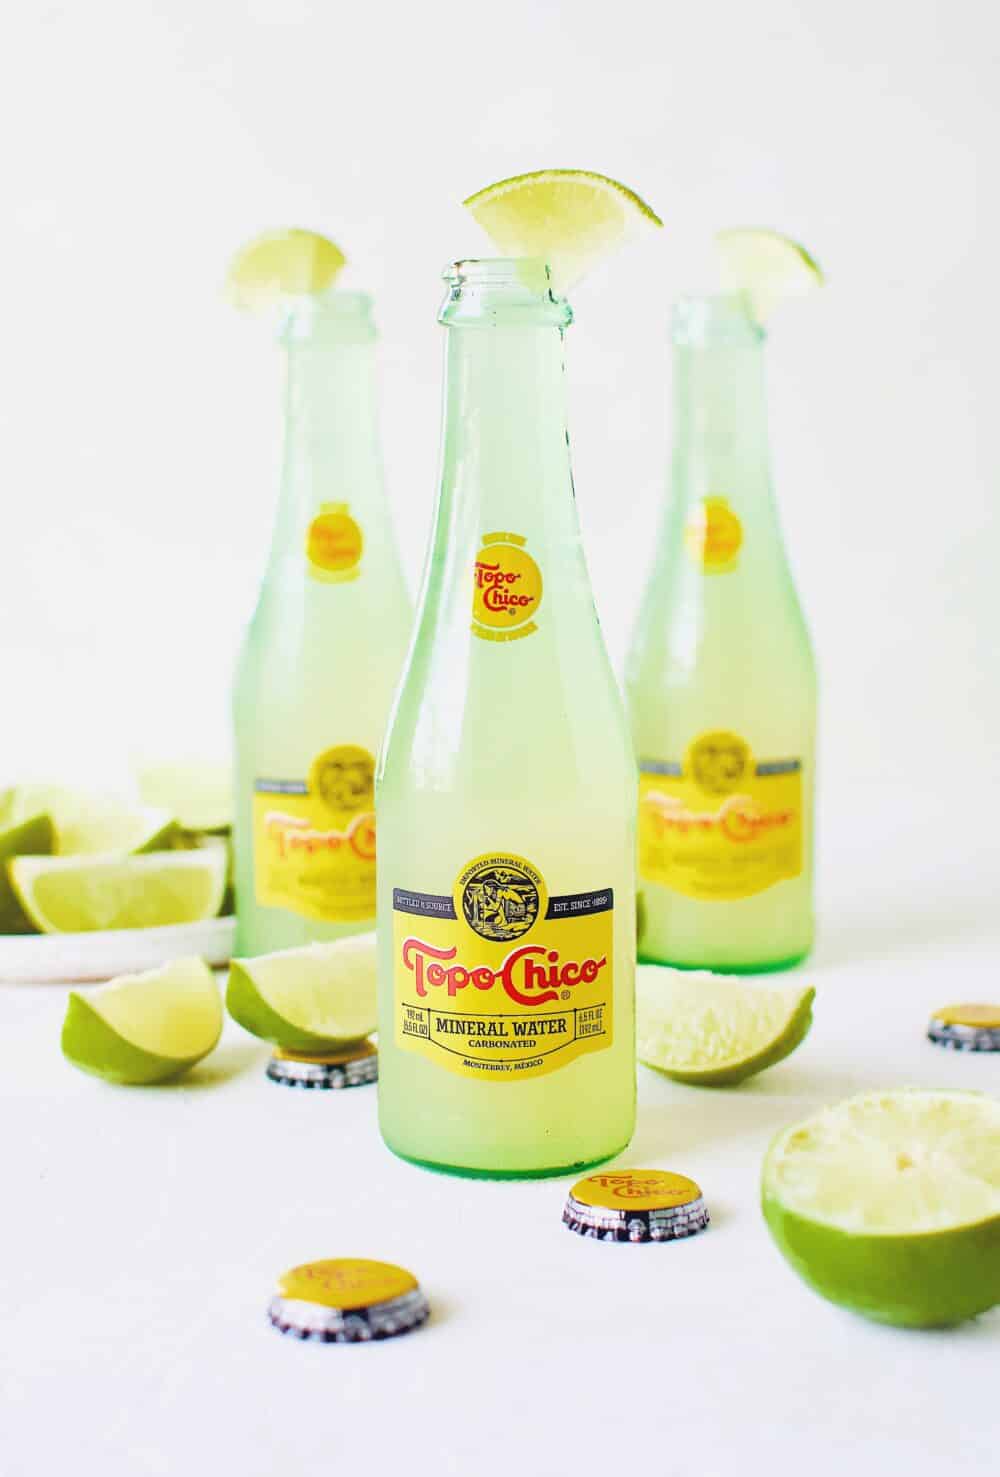 Topo Chico Margaritas bottled cocktails, surrounded by wedged limes.